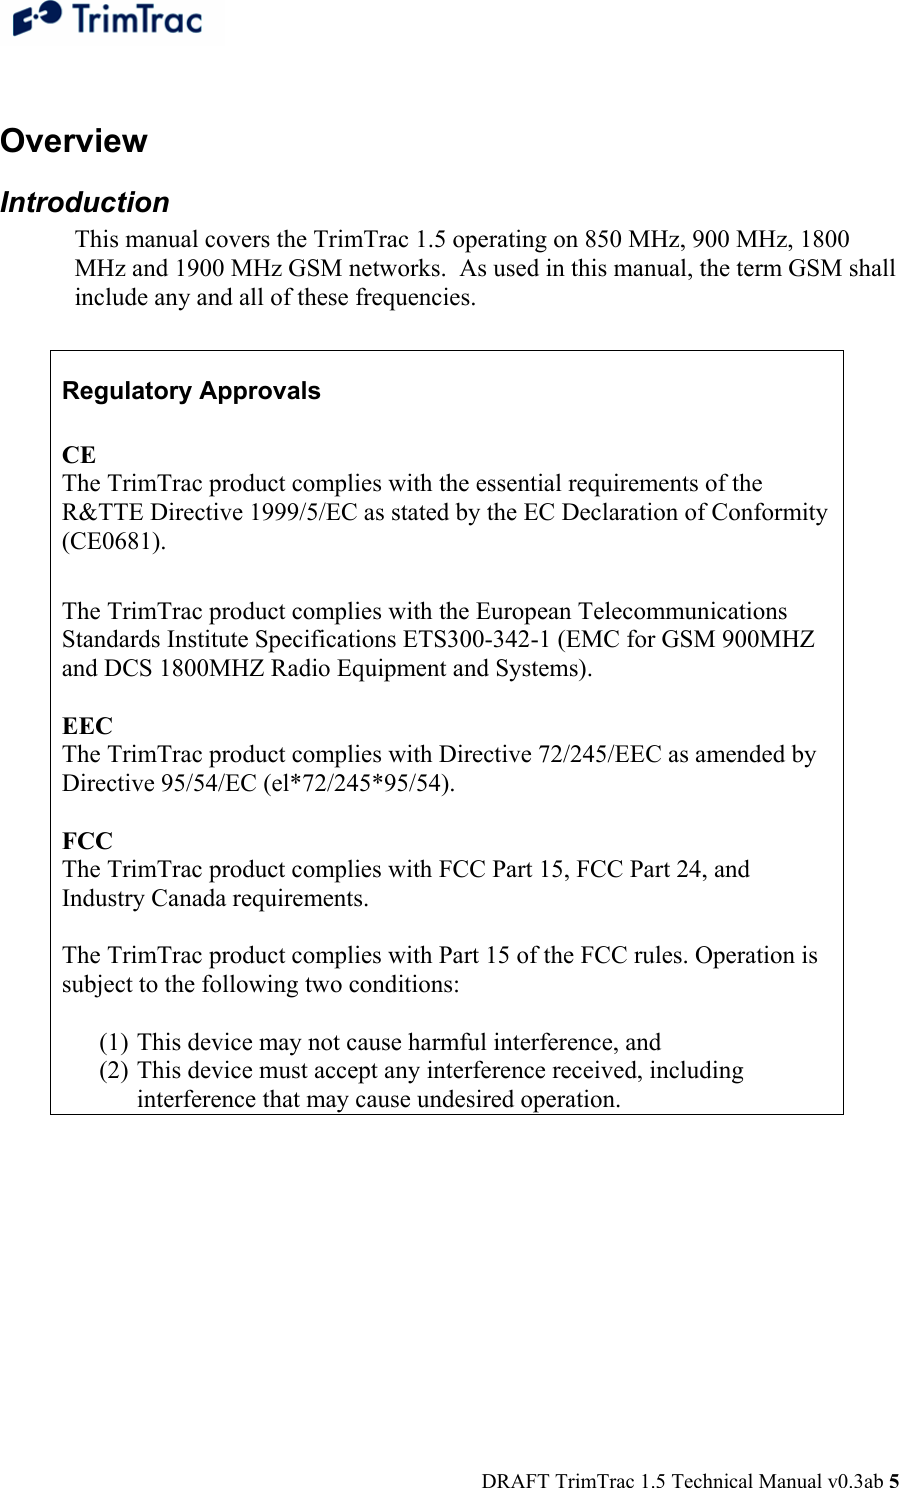  DRAFT TrimTrac 1.5 Technical Manual v0.3ab 5  Overview Introduction This manual covers the TrimTrac 1.5 operating on 850 MHz, 900 MHz, 1800 MHz and 1900 MHz GSM networks.  As used in this manual, the term GSM shall include any and all of these frequencies.  Regulatory Approvals  CE  The TrimTrac product complies with the essential requirements of the R&amp;TTE Directive 1999/5/EC as stated by the EC Declaration of Conformity (CE0681).   The TrimTrac product complies with the European Telecommunications Standards Institute Specifications ETS300-342-1 (EMC for GSM 900MHZ and DCS 1800MHZ Radio Equipment and Systems).   EEC  The TrimTrac product complies with Directive 72/245/EEC as amended by Directive 95/54/EC (el*72/245*95/54). 1.1.2   FCC  The TrimTrac product complies with FCC Part 15, FCC Part 24, and Industry Canada requirements.   The TrimTrac product complies with Part 15 of the FCC rules. Operation is subject to the following two conditions:   (1) This device may not cause harmful interference, and  (2) This device must accept any interference received, including interference that may cause undesired operation.  